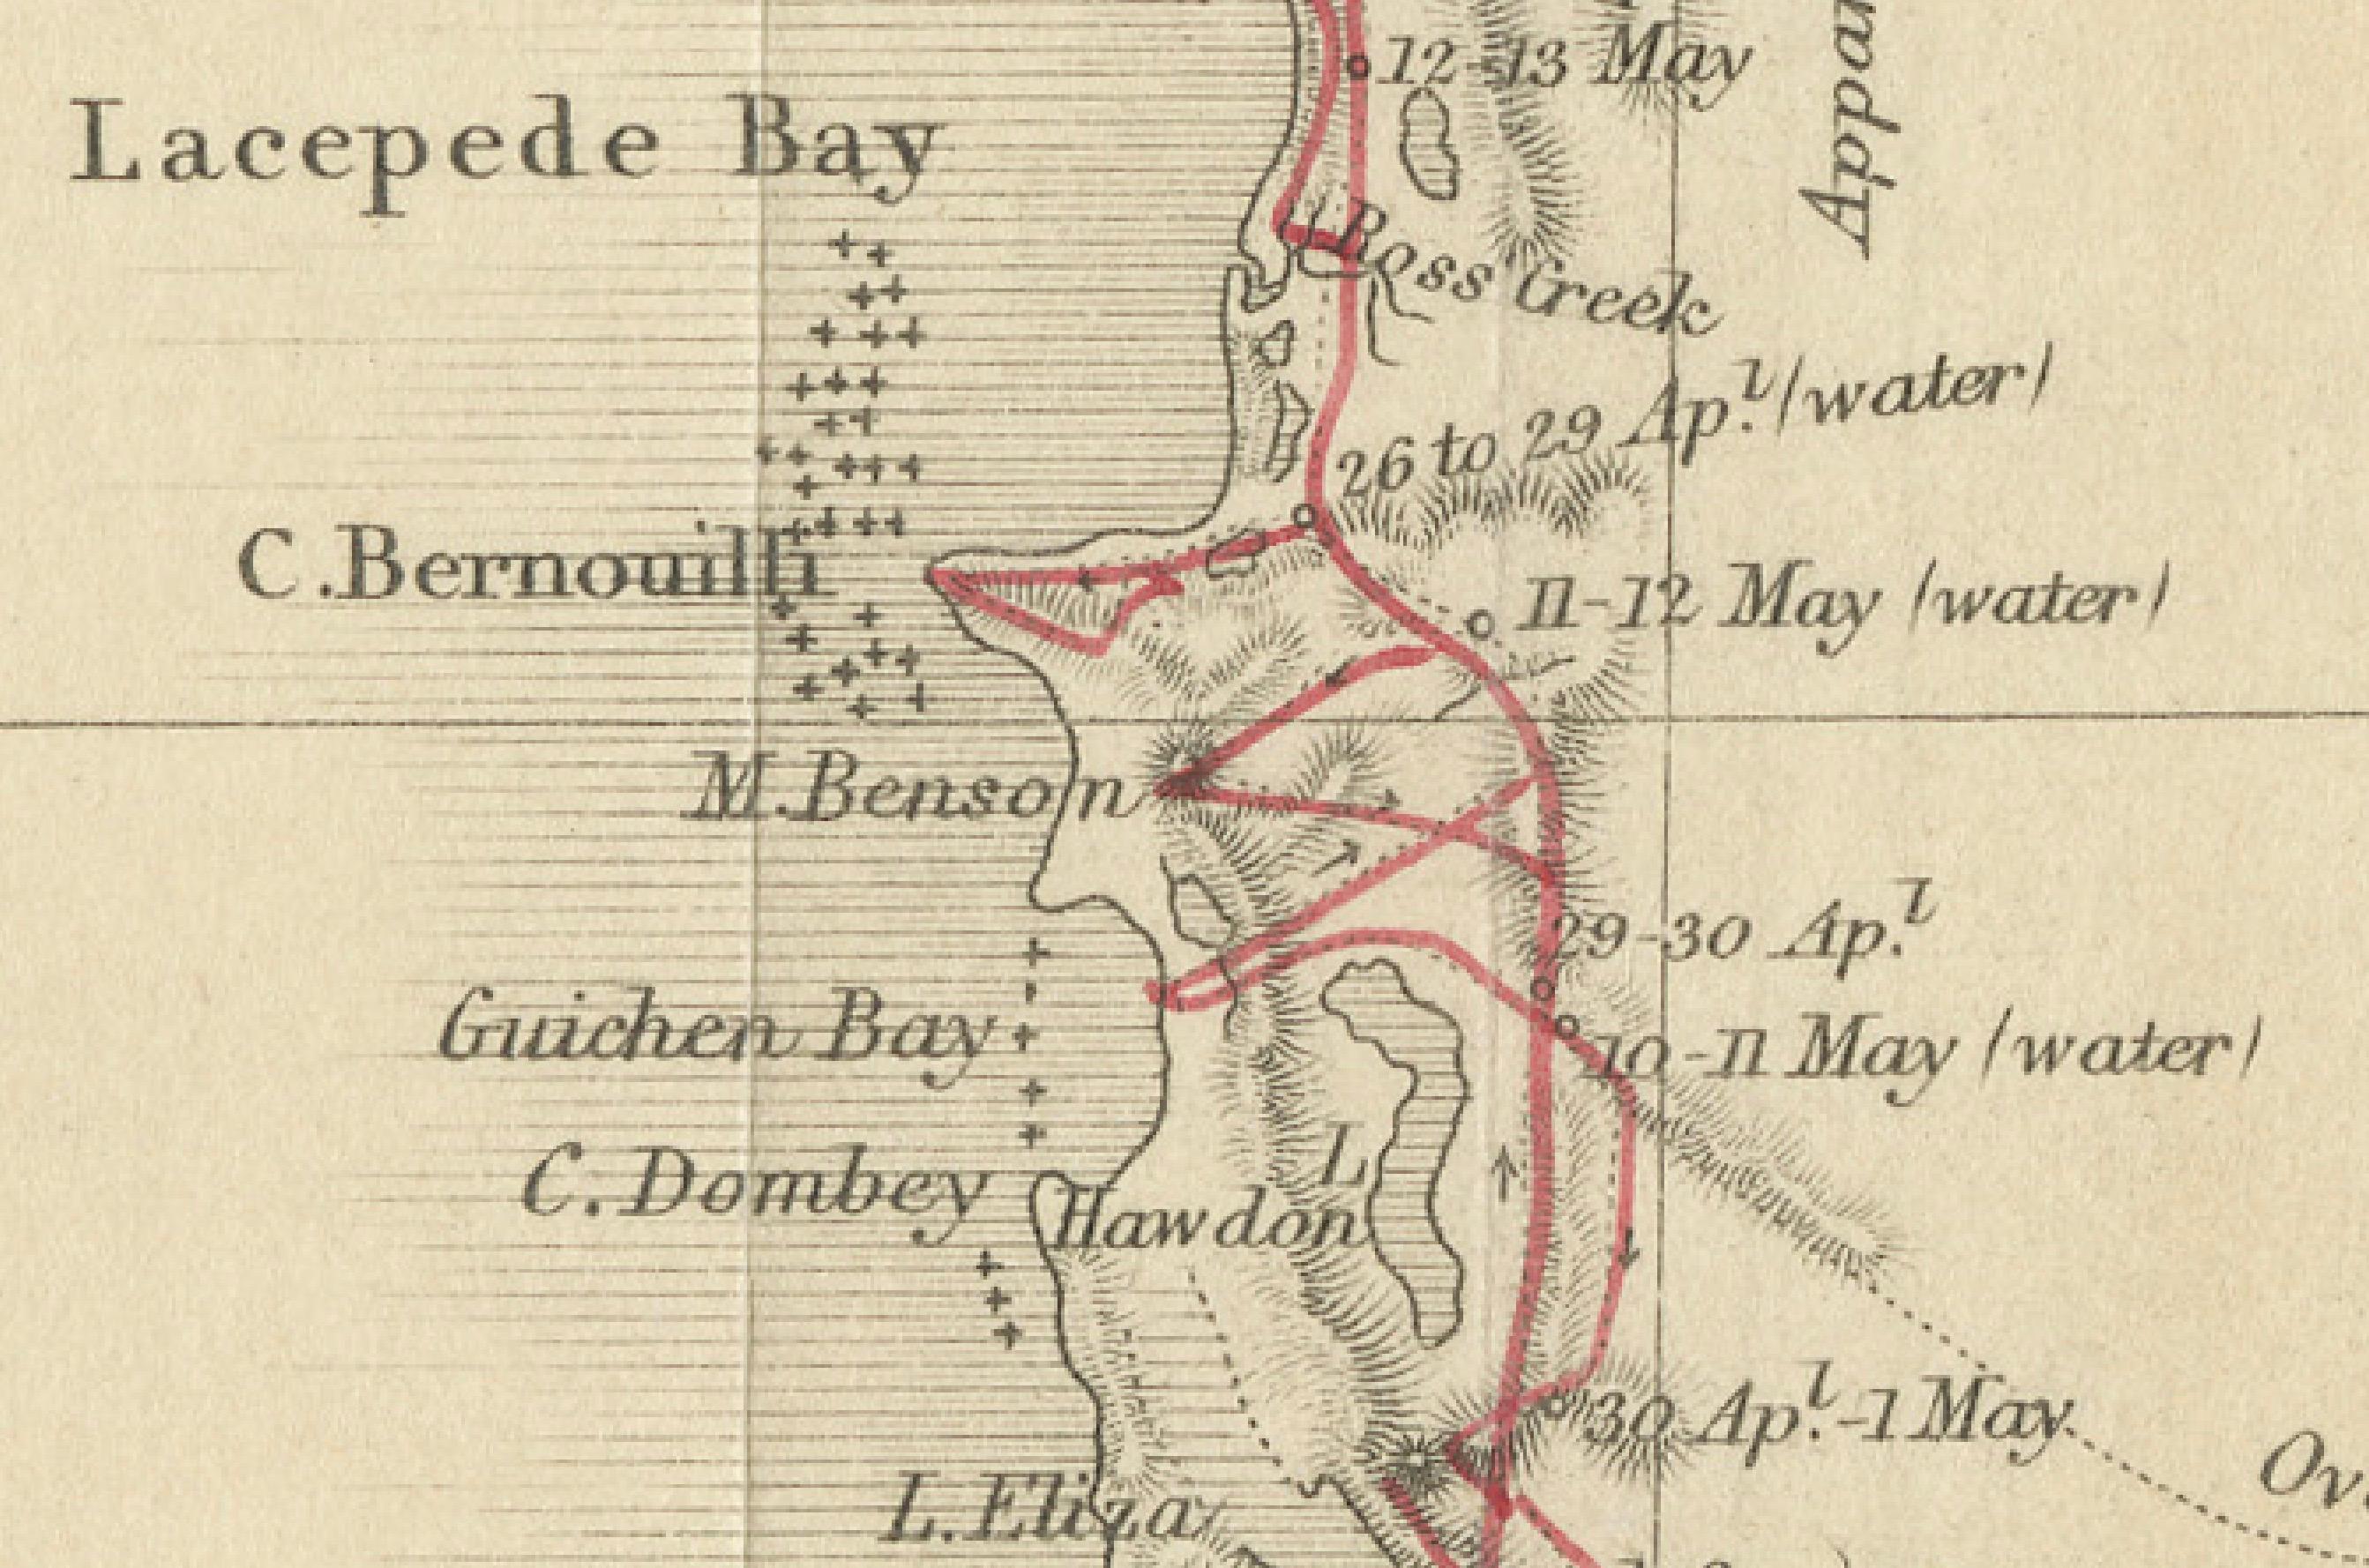 This is a historical document and part of a map and illustration from an expedition. The text indicates it is from South Australia to illustrate Governor G. Grey's Expedition in 1841. It includes detailed sketches of landscapes and geological